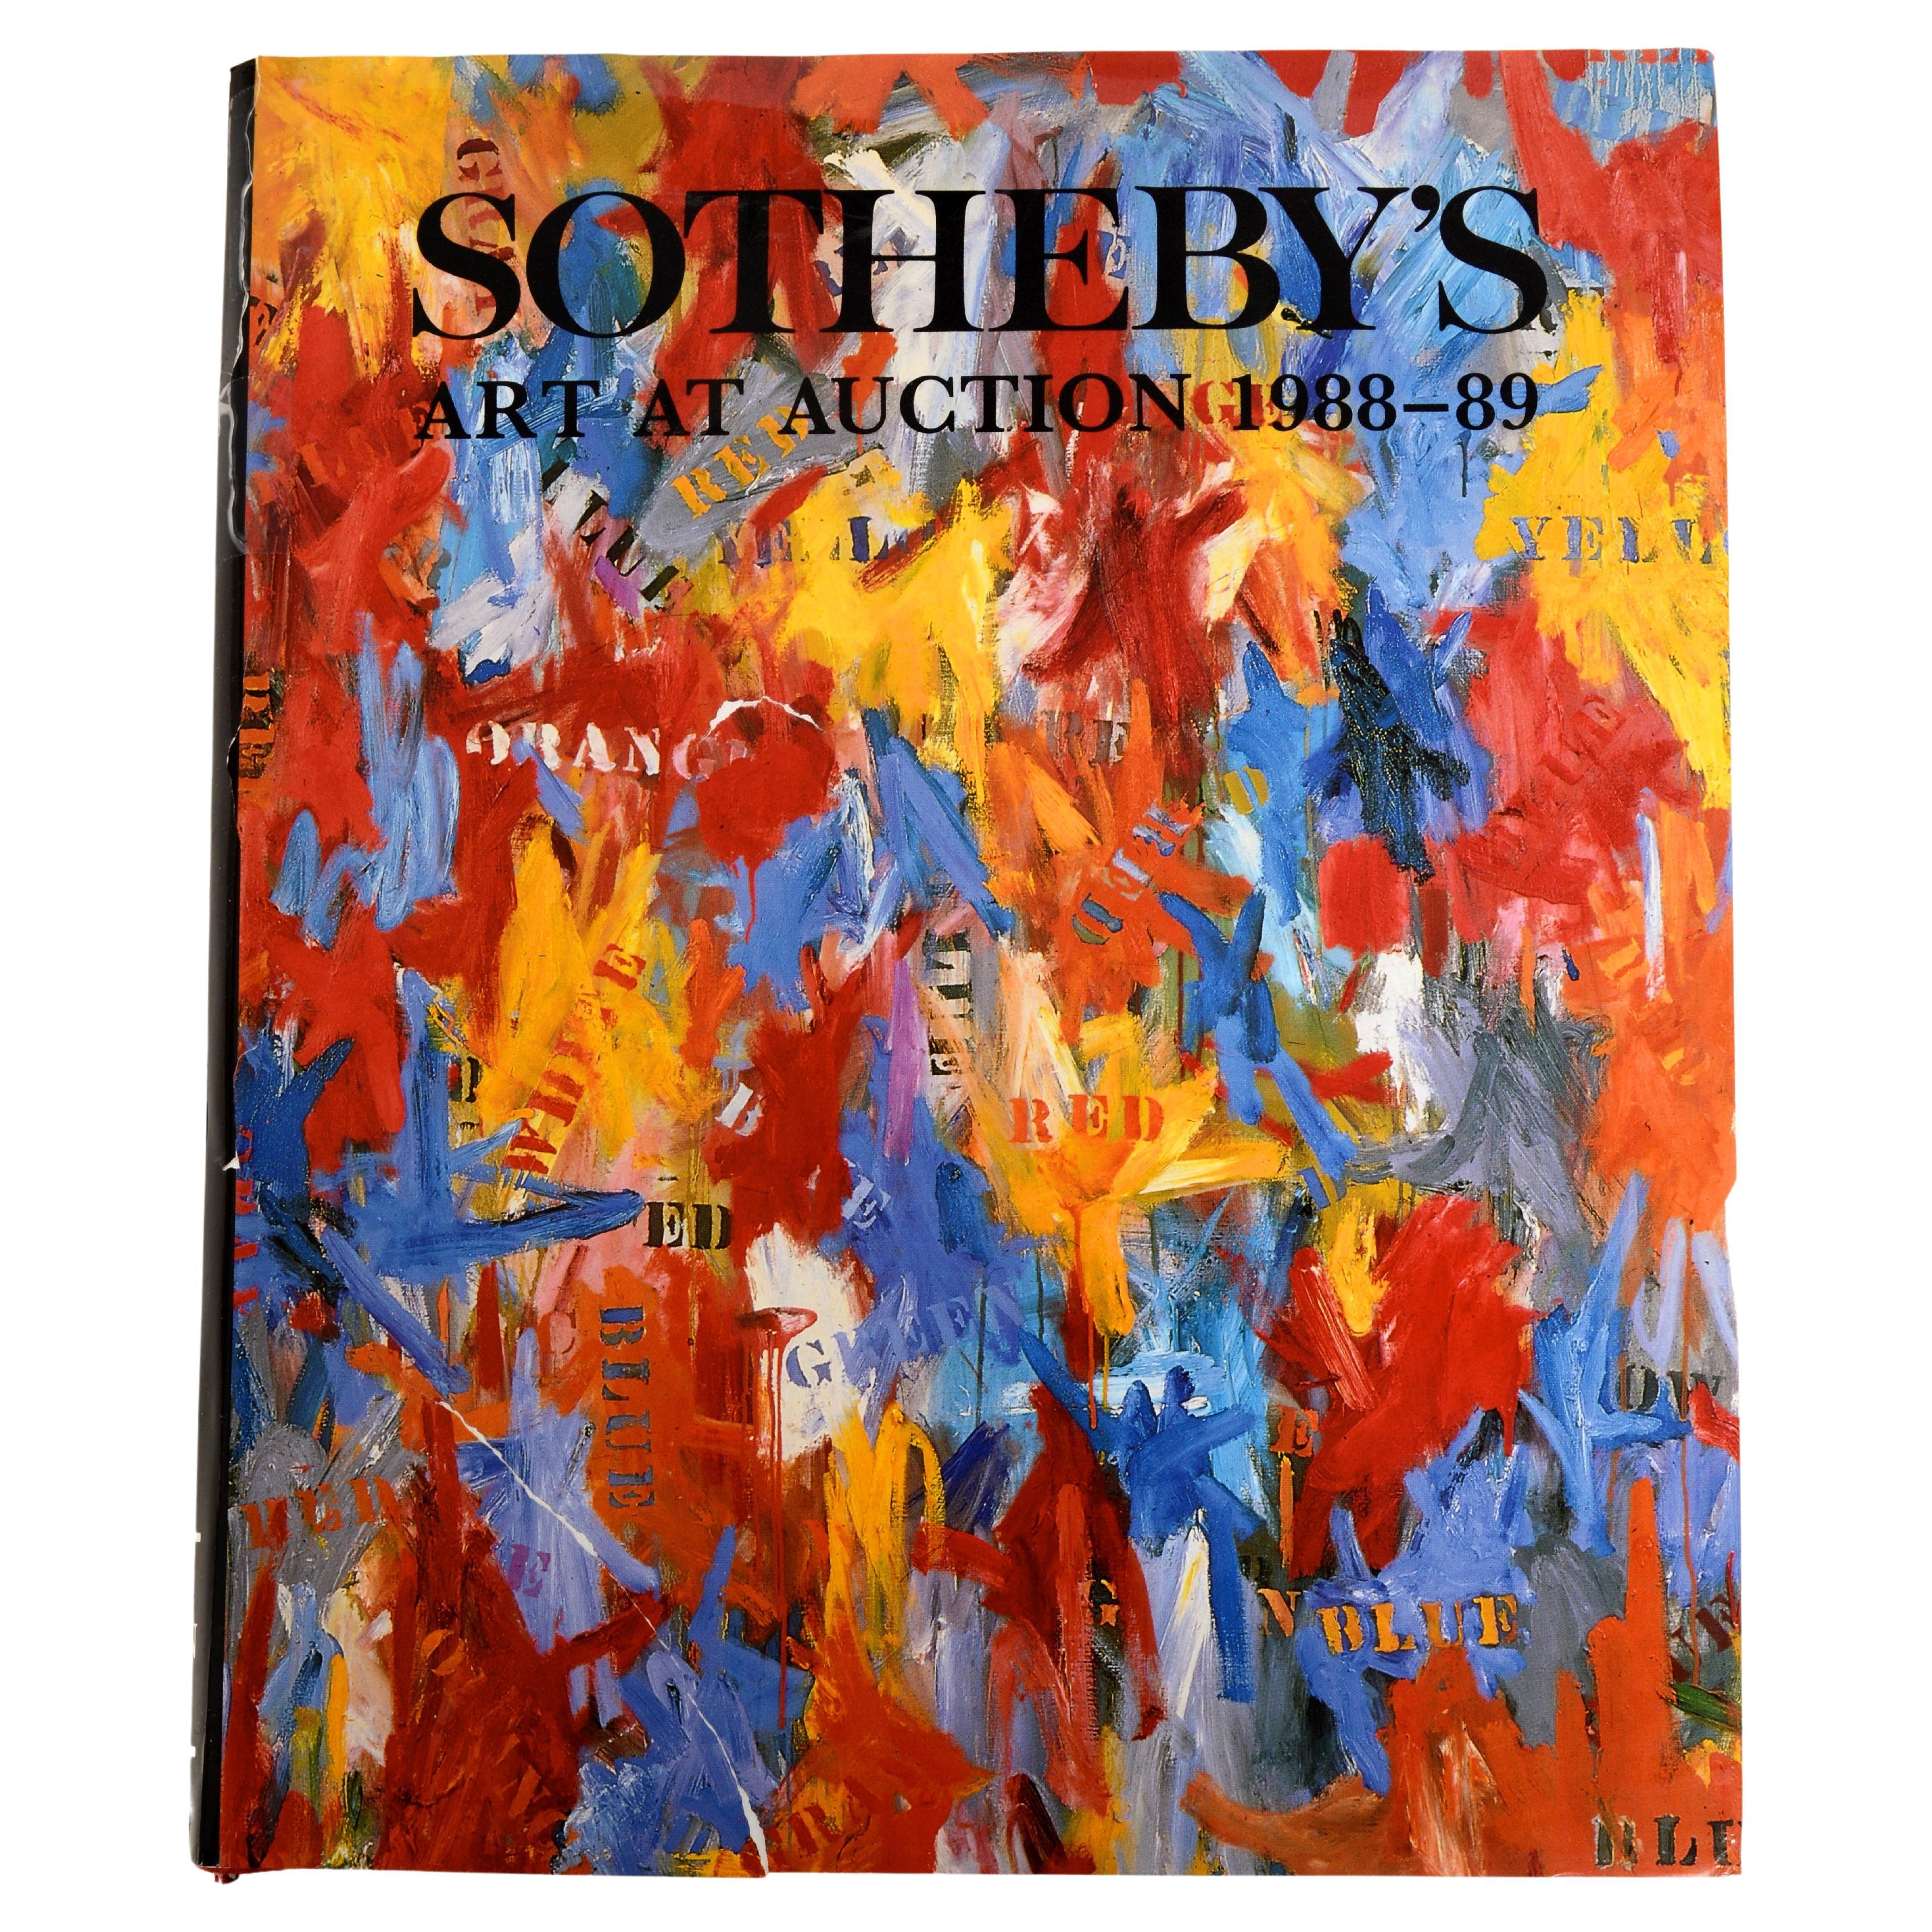 Sotheby's Art at Auction-1988-89 by Sally Liddell, 'Editor', Jasper Johns Cover